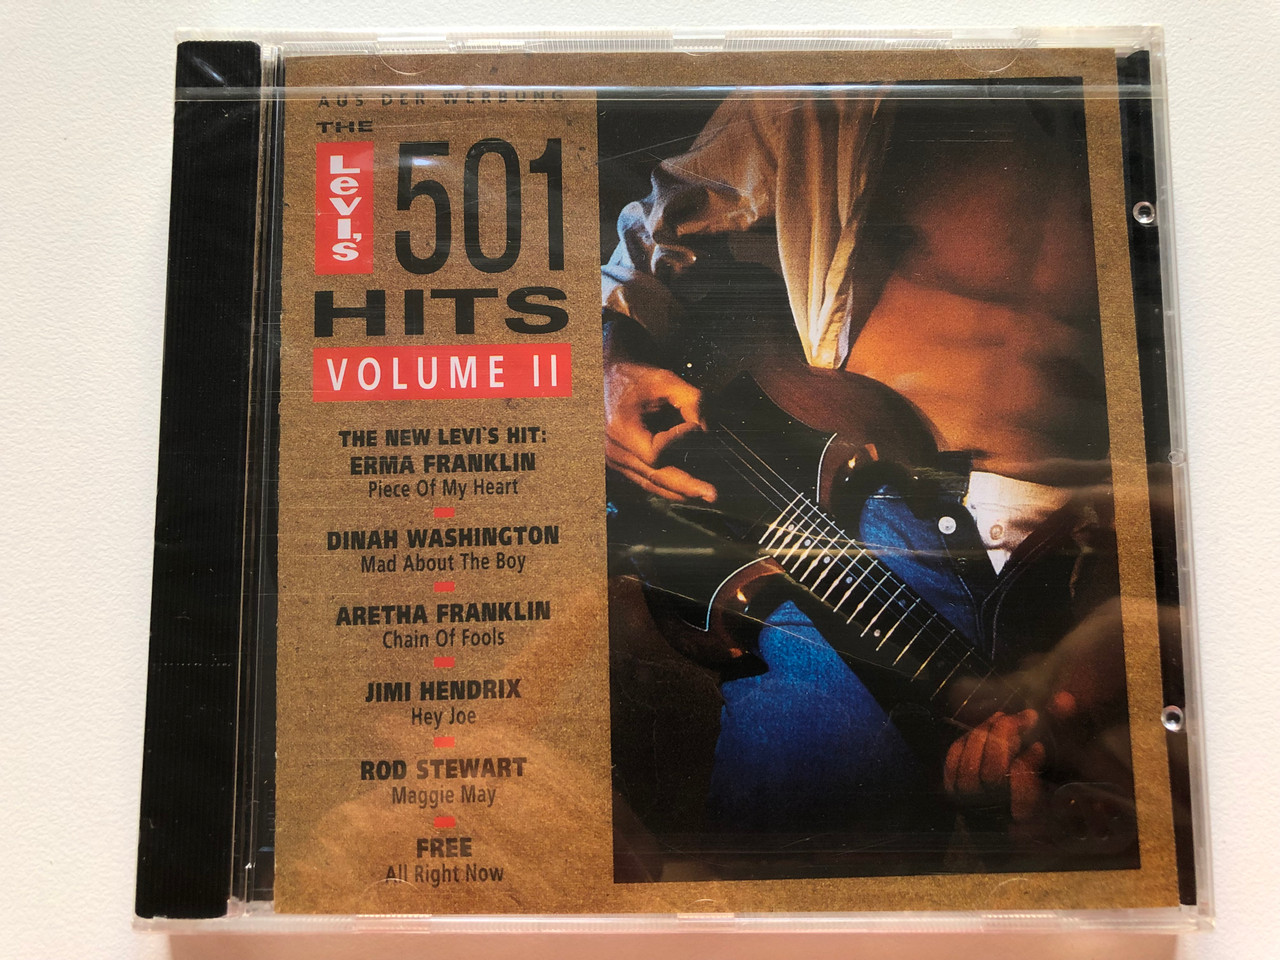 The Levi's 501 Hits Vol. II / The New Levi's Hit: Erma Franklin - Piece Of  My Heart,